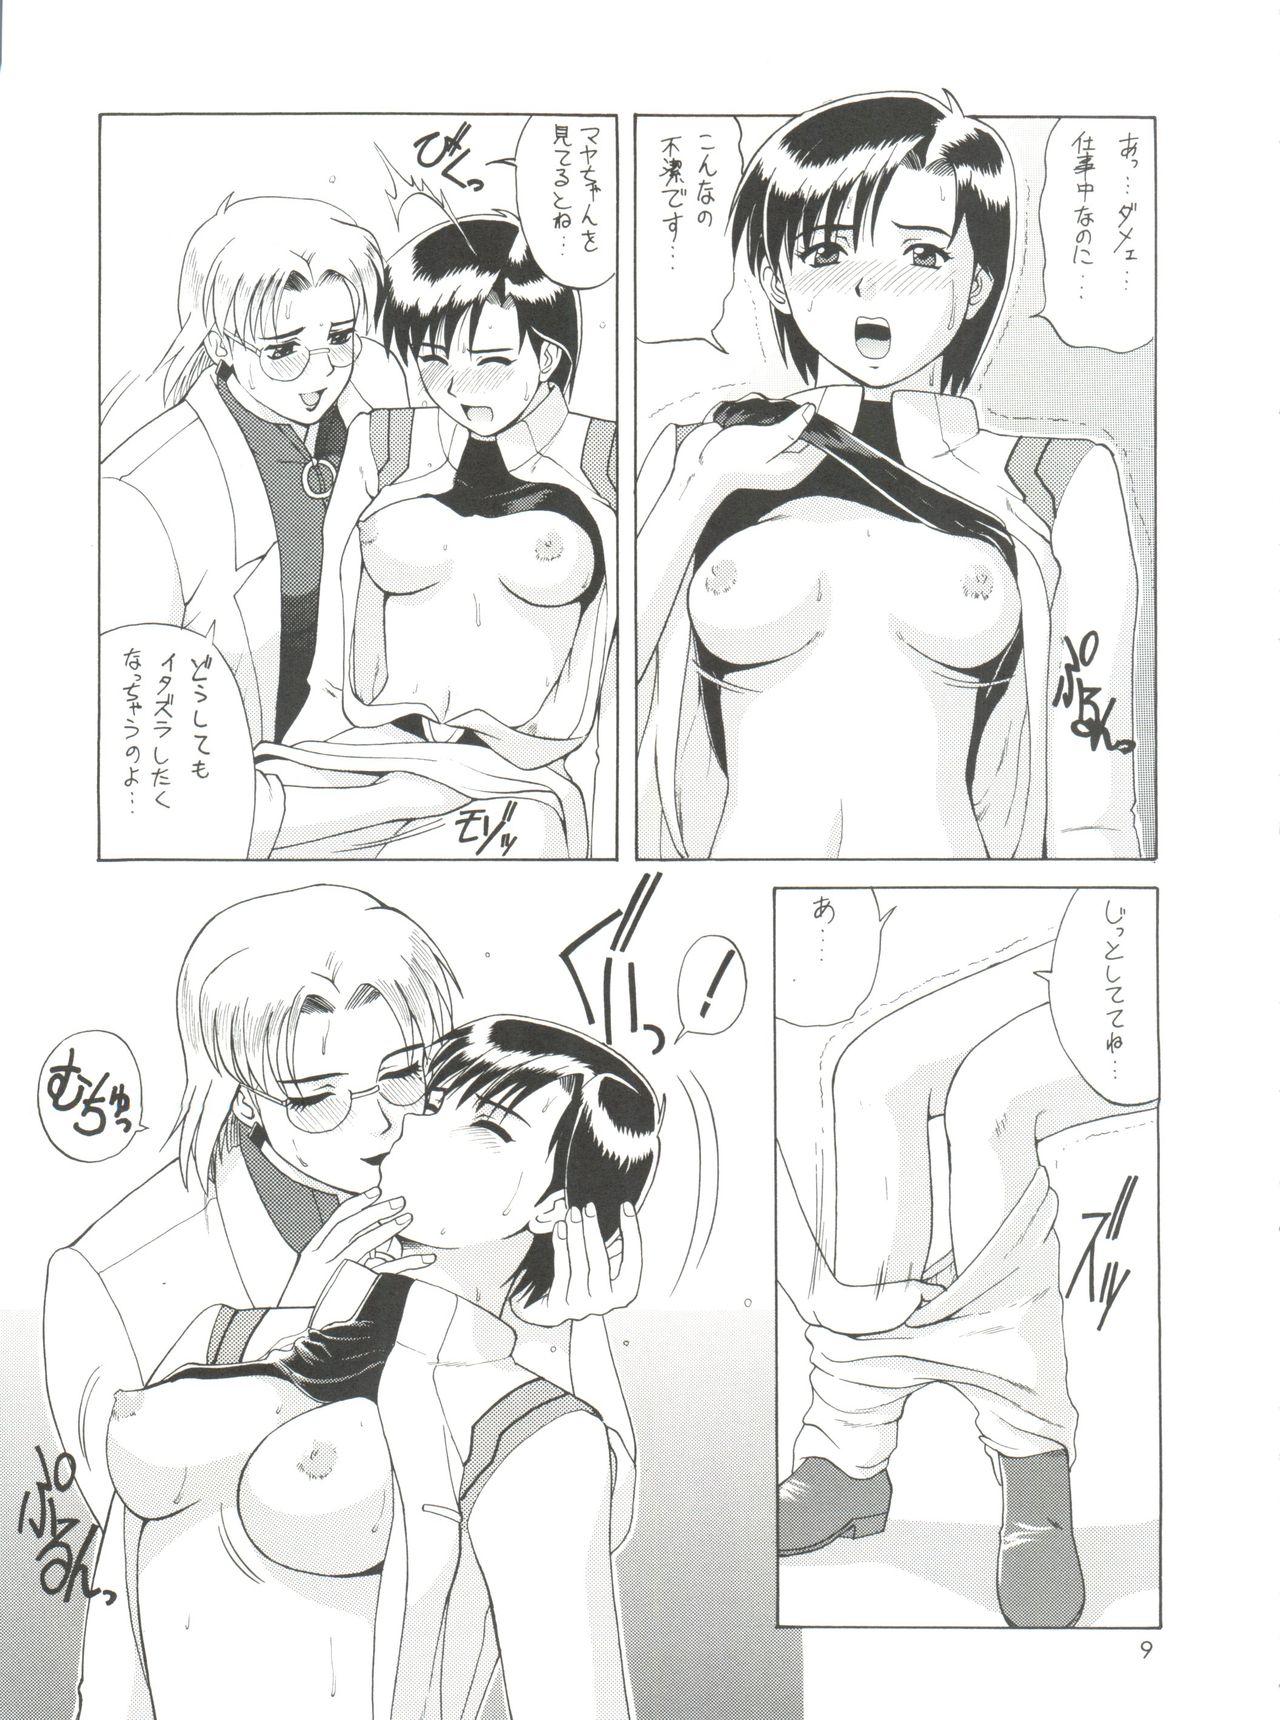 Amateurs Gone Wild Suite For My Sweet Shinteiban - Neon genesis evangelion Girlfriends - Page 8